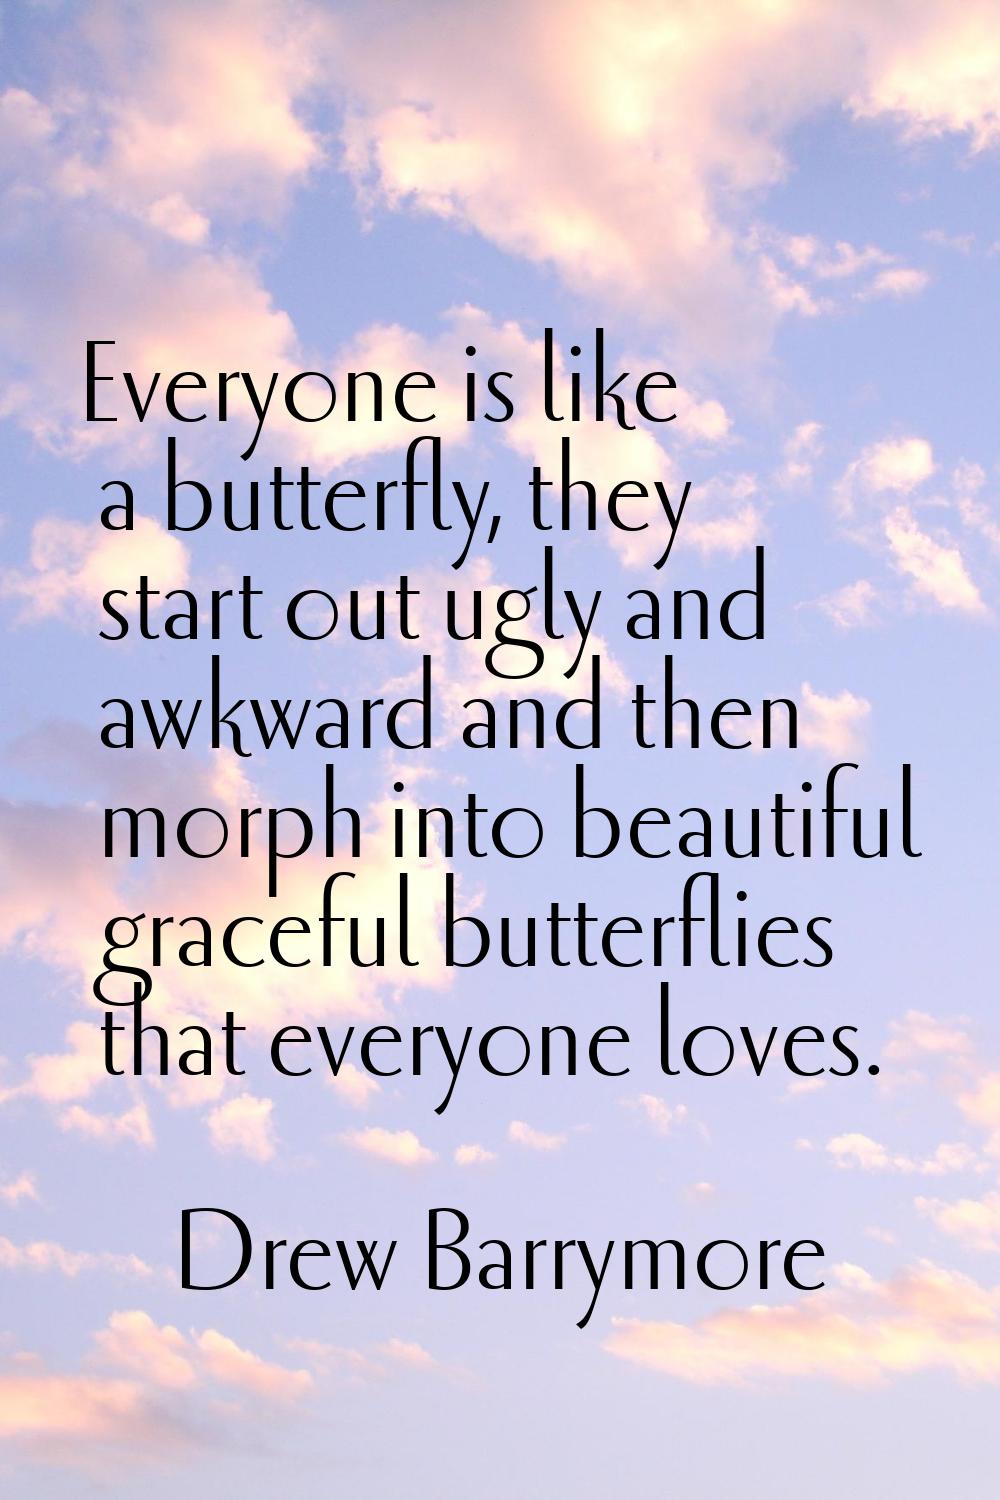 Everyone is like a butterfly, they start out ugly and awkward and then morph into beautiful gracefu